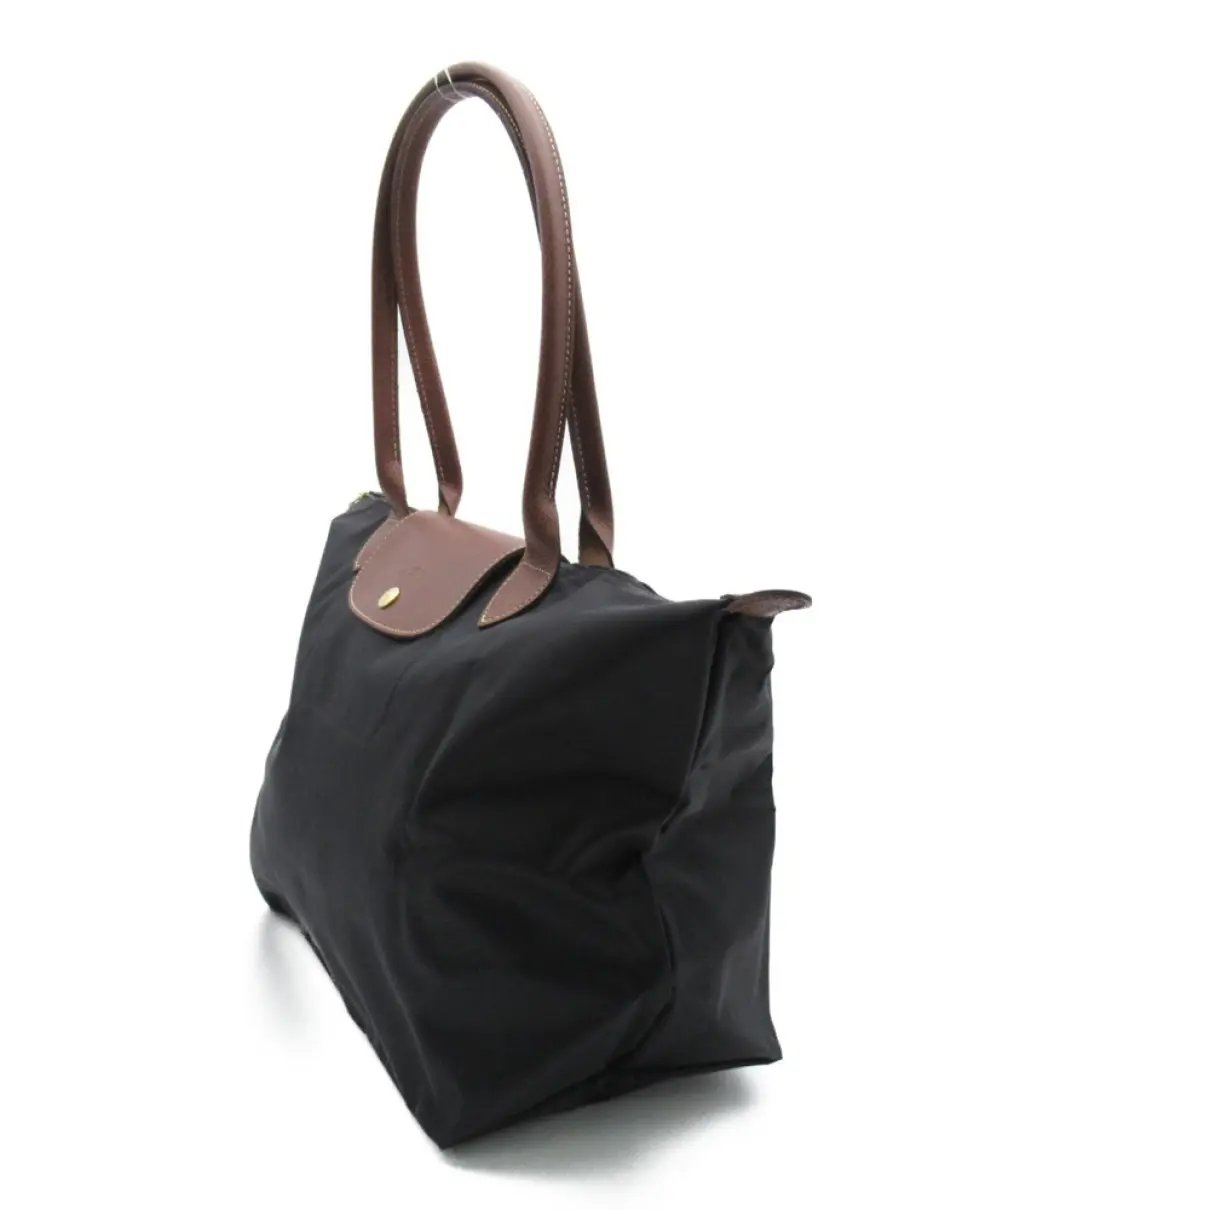 Buy Longchamp Pliage leather tote online